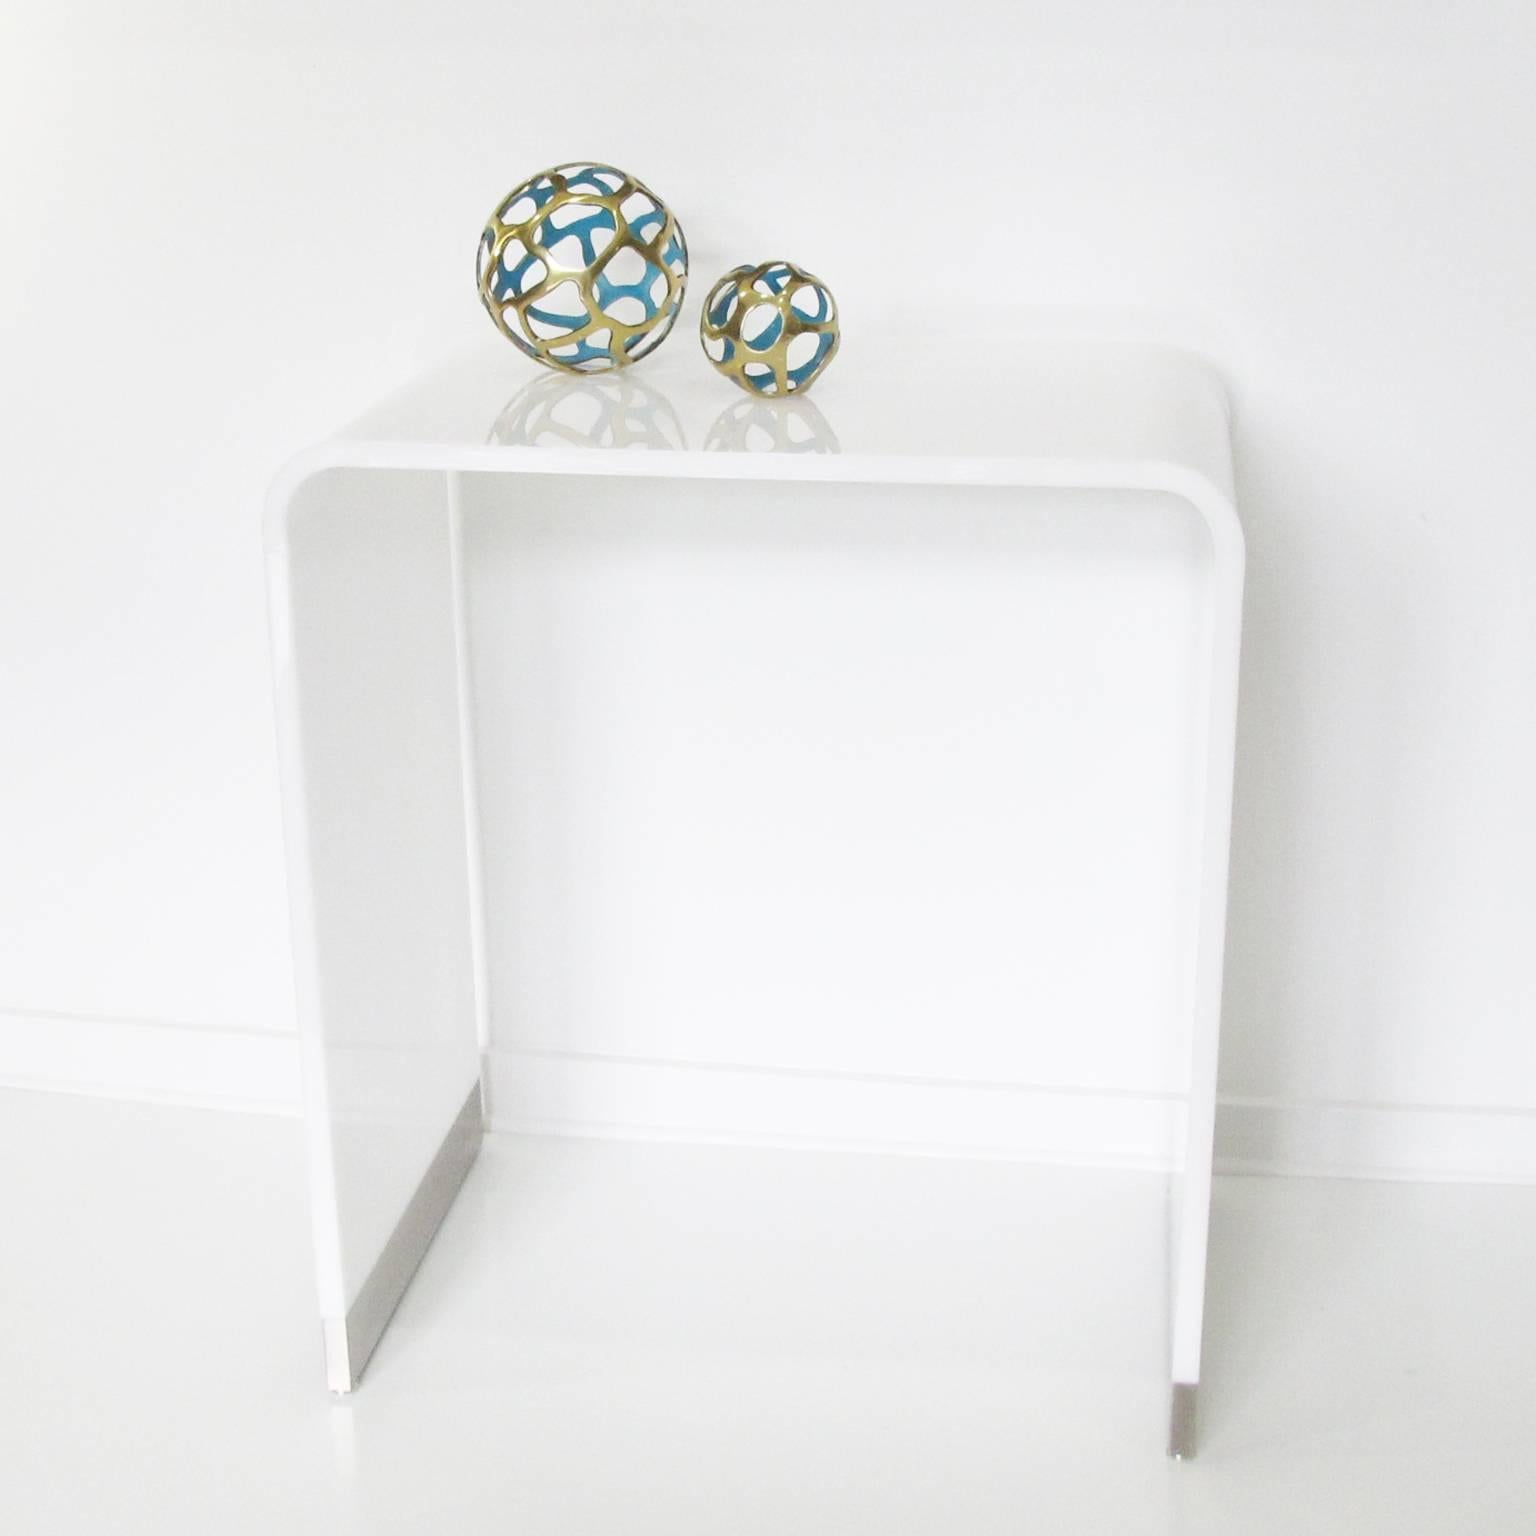 Stunning minimalist Acrylic or Lucite console table. Extra thick pure white acrylic slab (0.82 in. thick) in waterfall shape with bull-nose edges, compliment with brushed stainless steel trim base. Very soft appearance, perfect for an entryway,